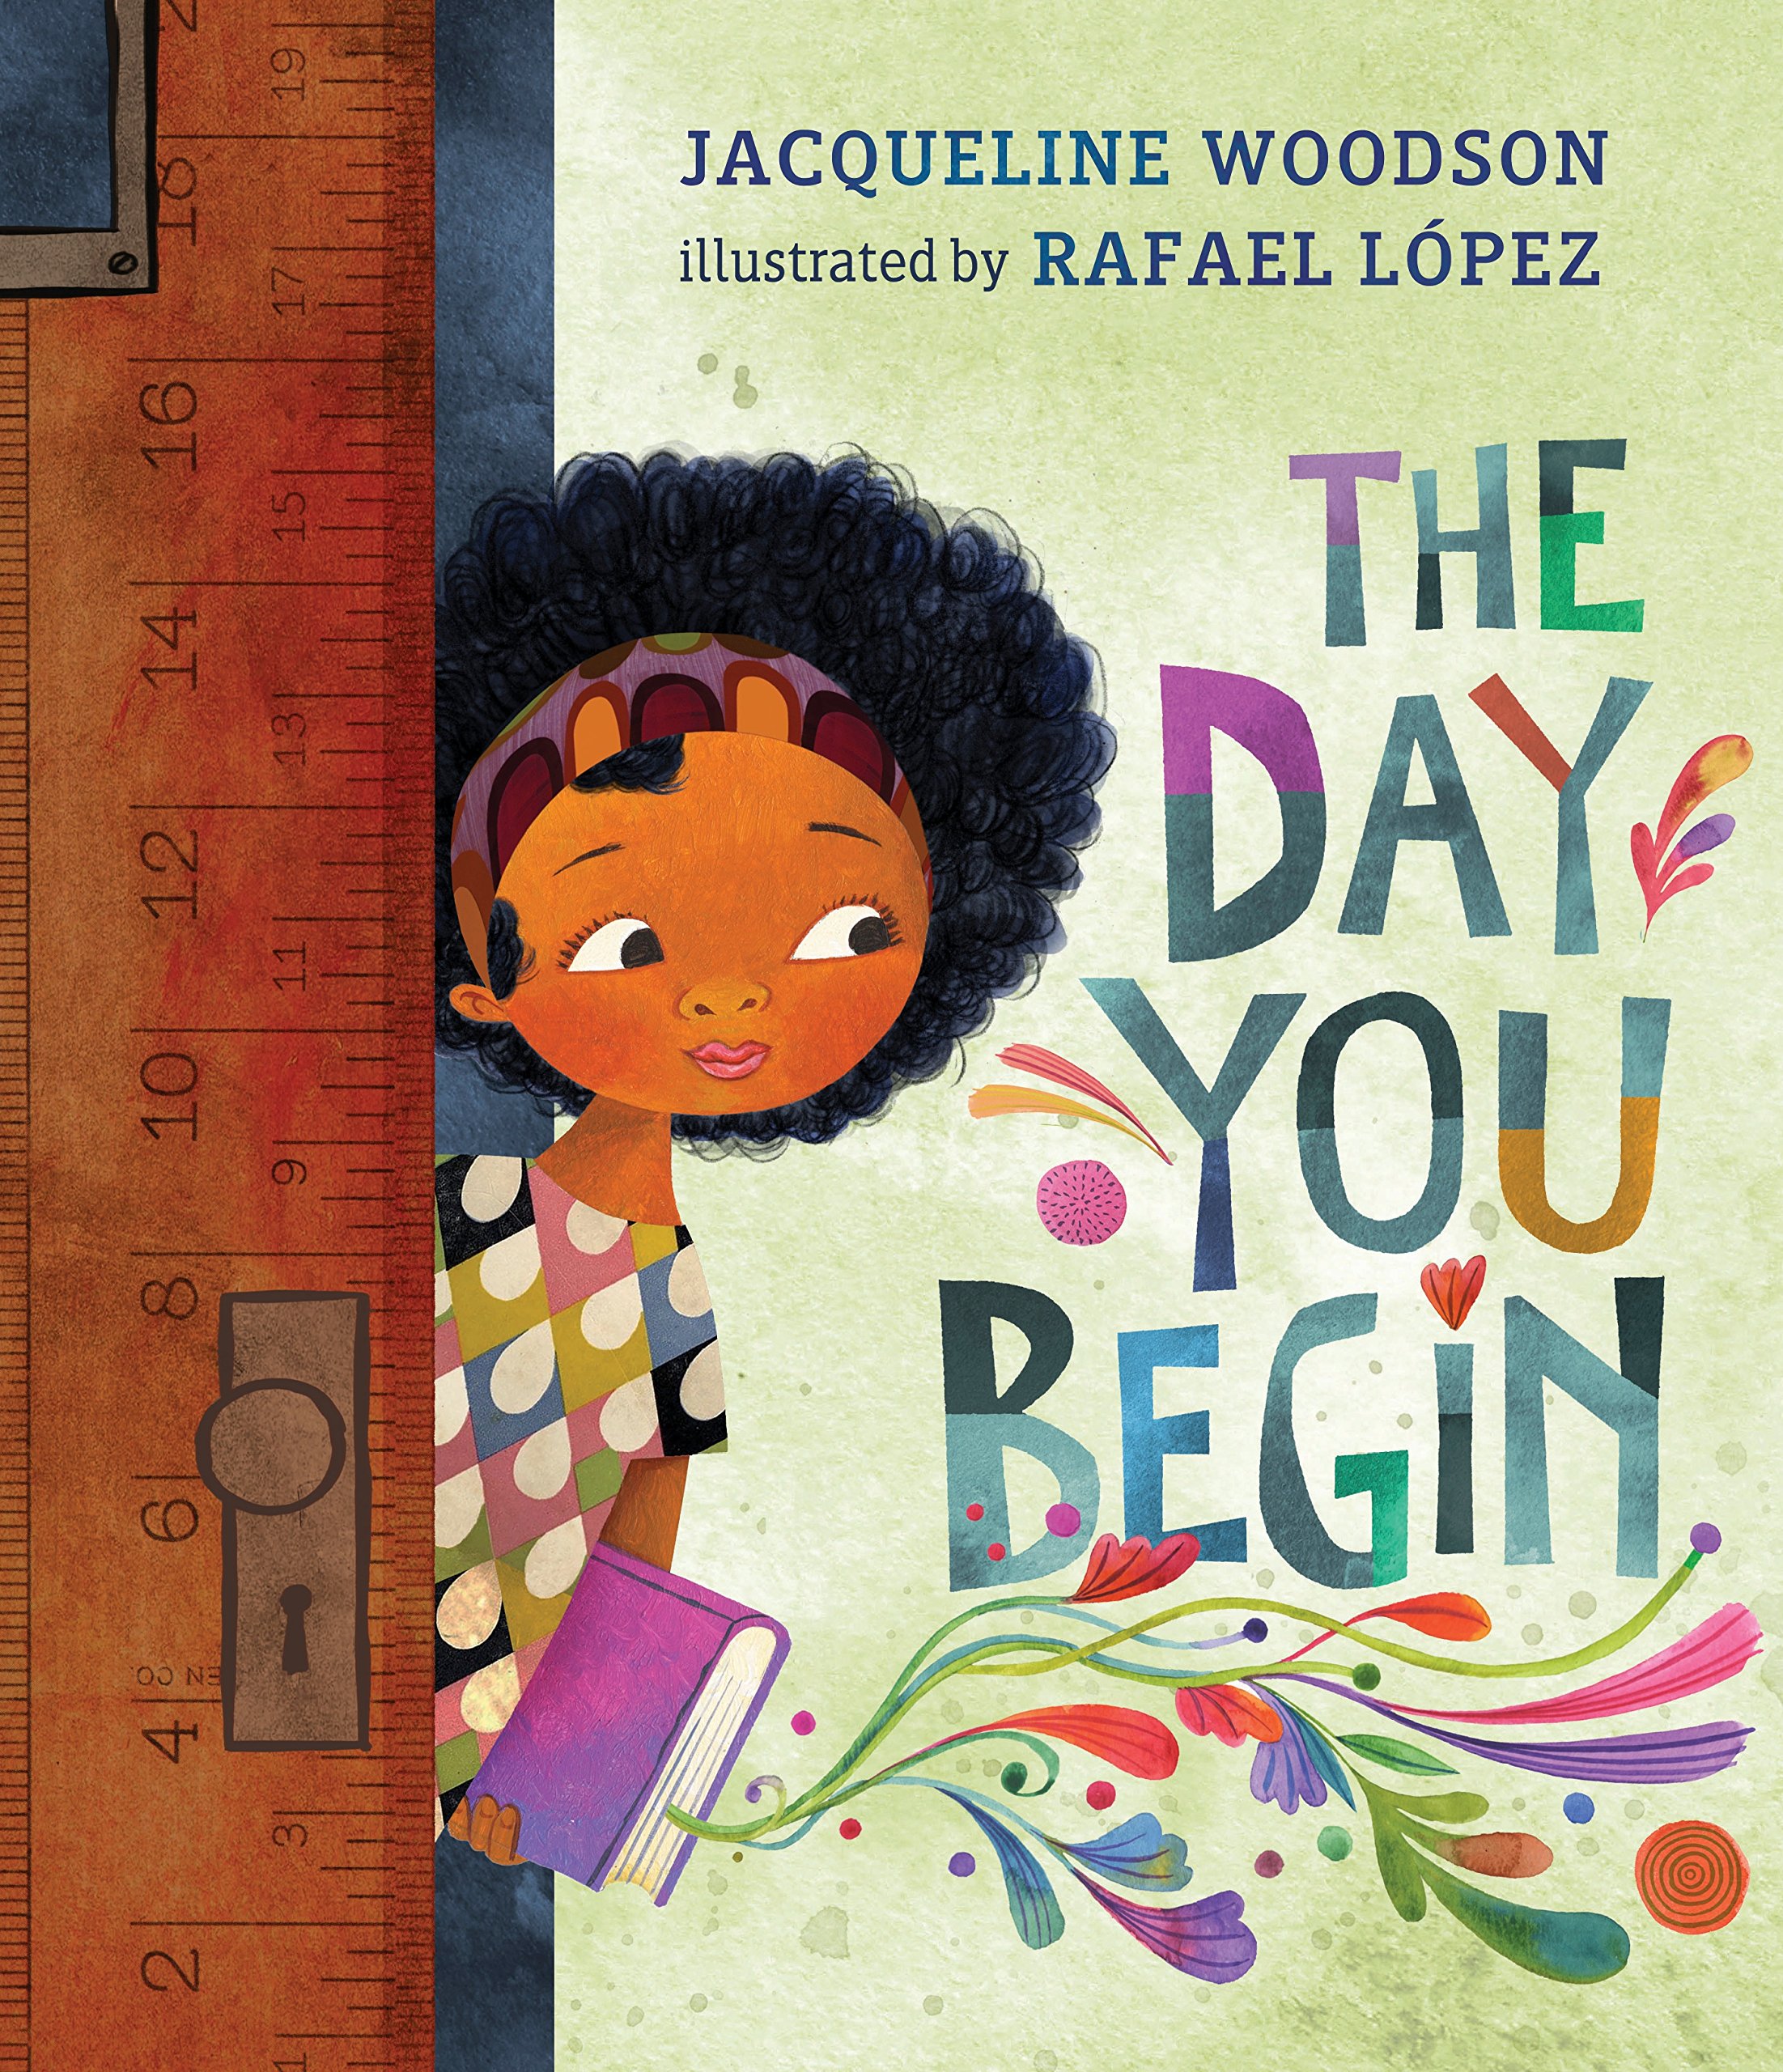 An illustration on the cover of the book “The Day You Begin” shows a girl with brown skin and curly black hair peeking out from behind a door as she enters a classroom.